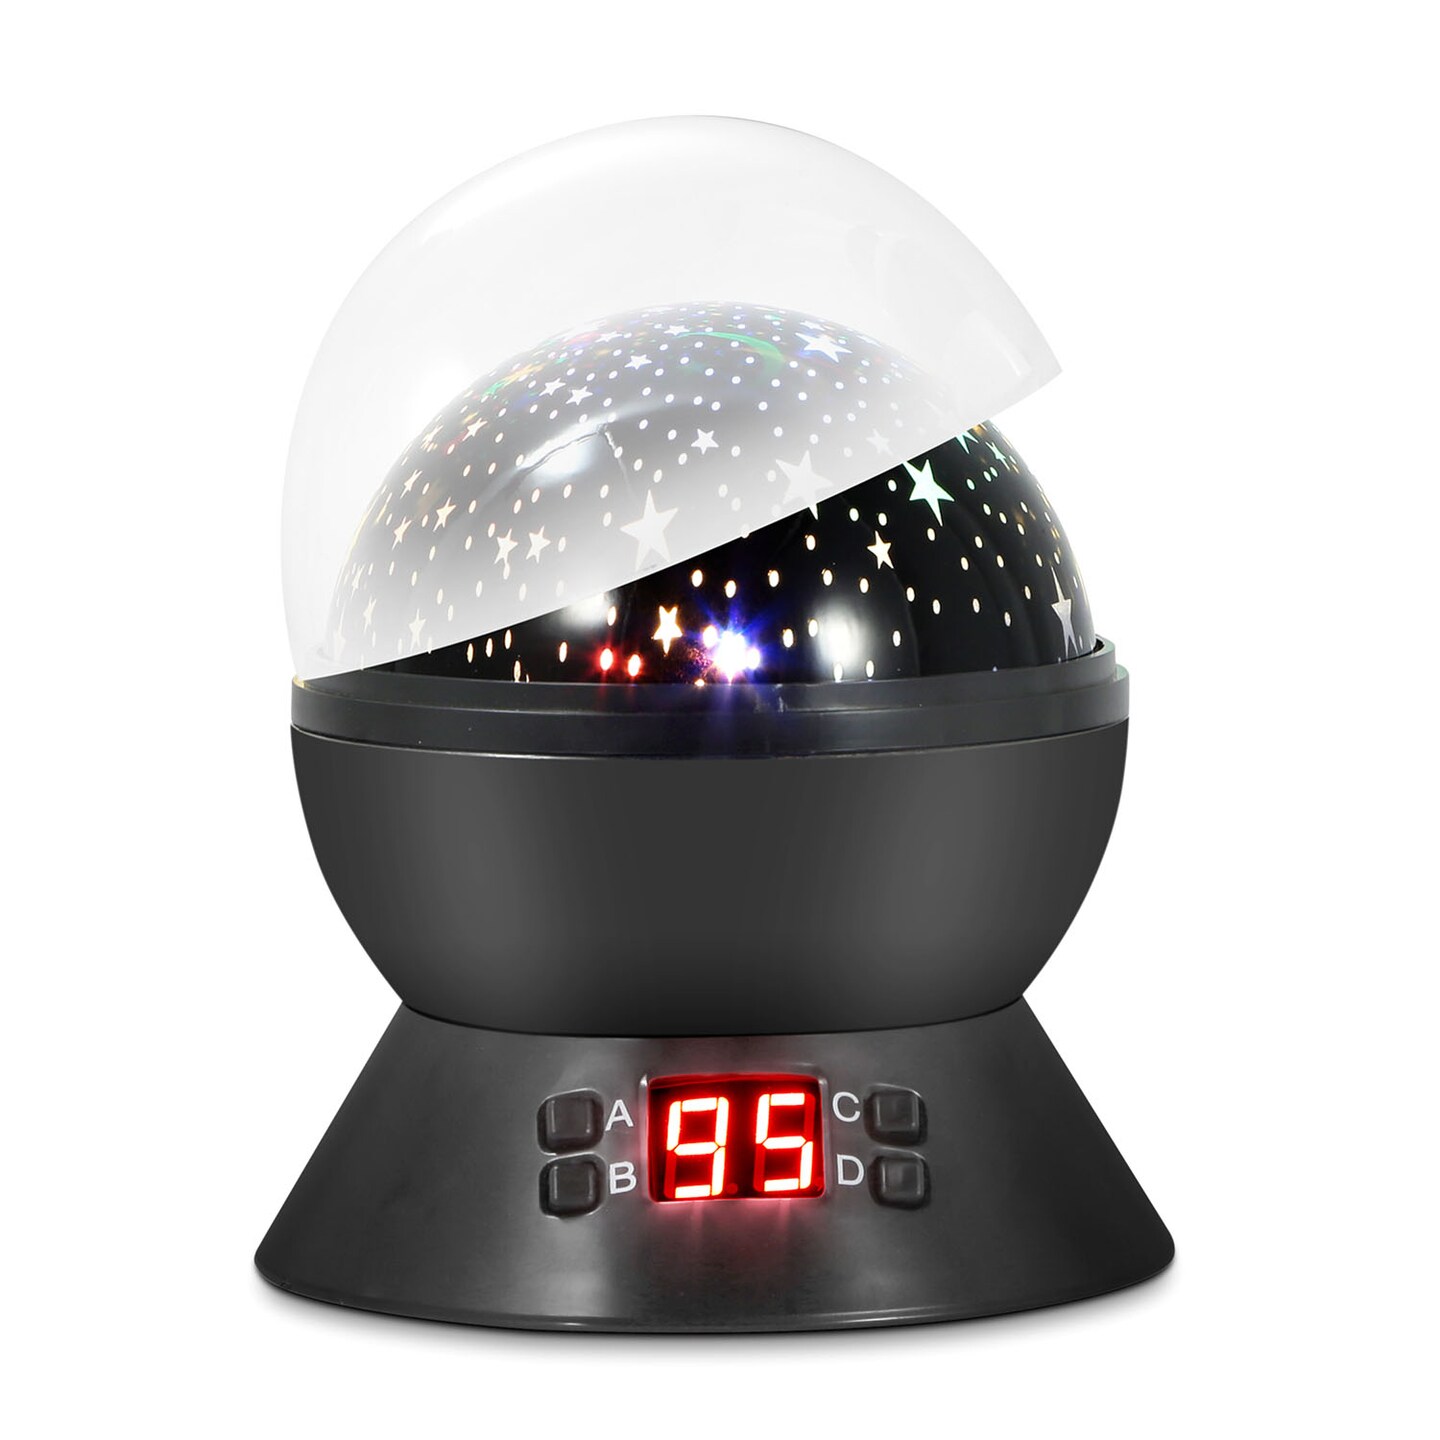 Global Phoenix LED Projector Lamp Kids Night Light Star Moon Projection Night Lamp 360 Rotation Timer for Children Bedroom